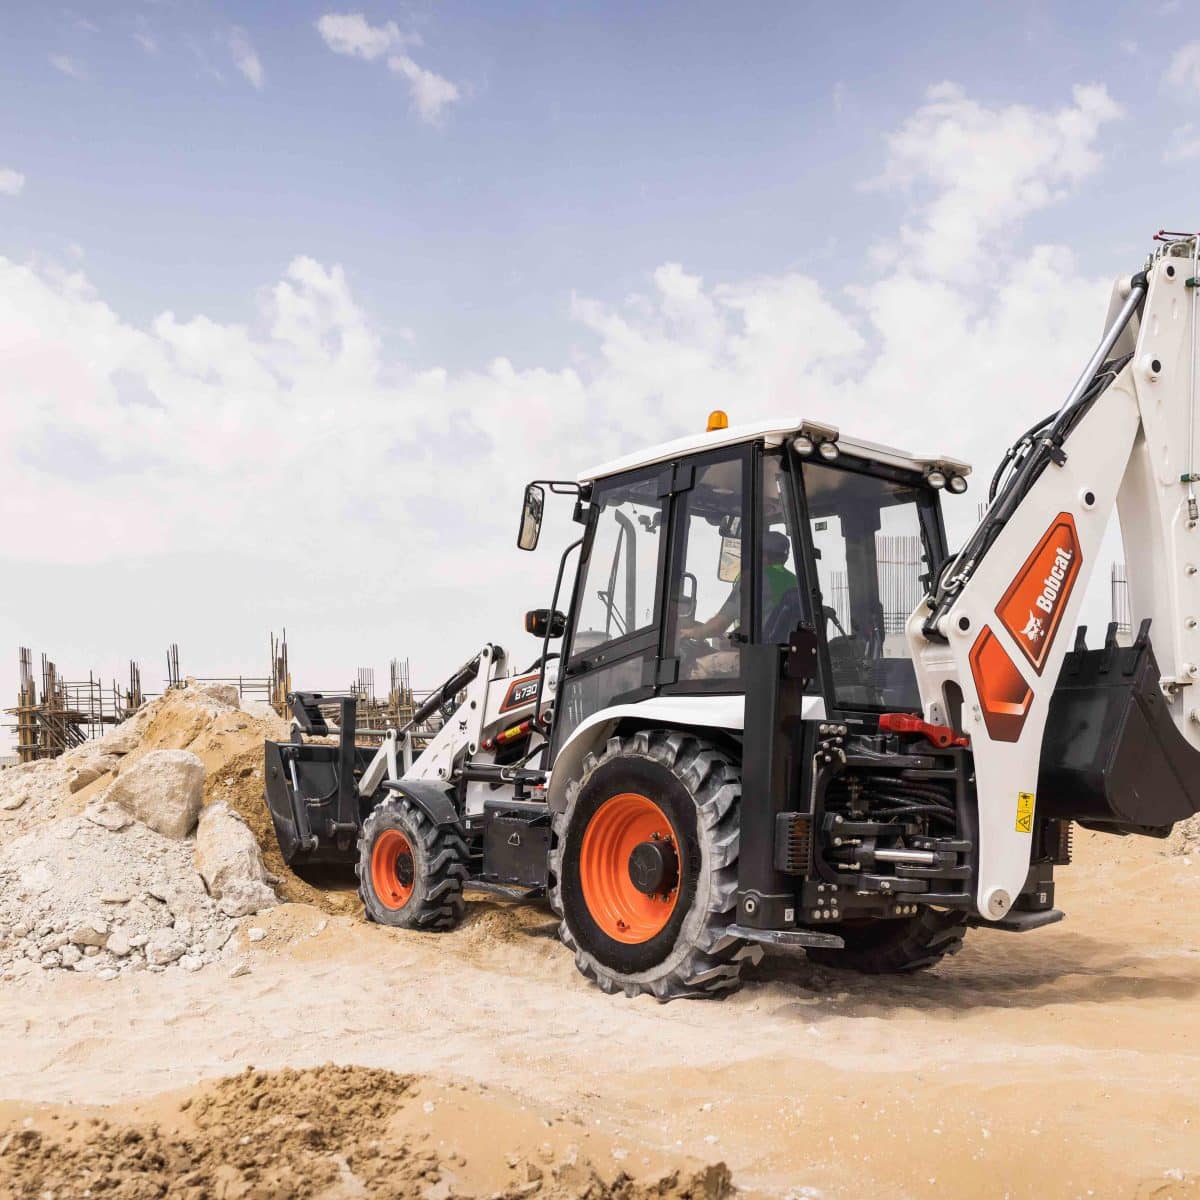 Bobcat bets on the backhoe, brings made-in-India B730 M-Series to the region